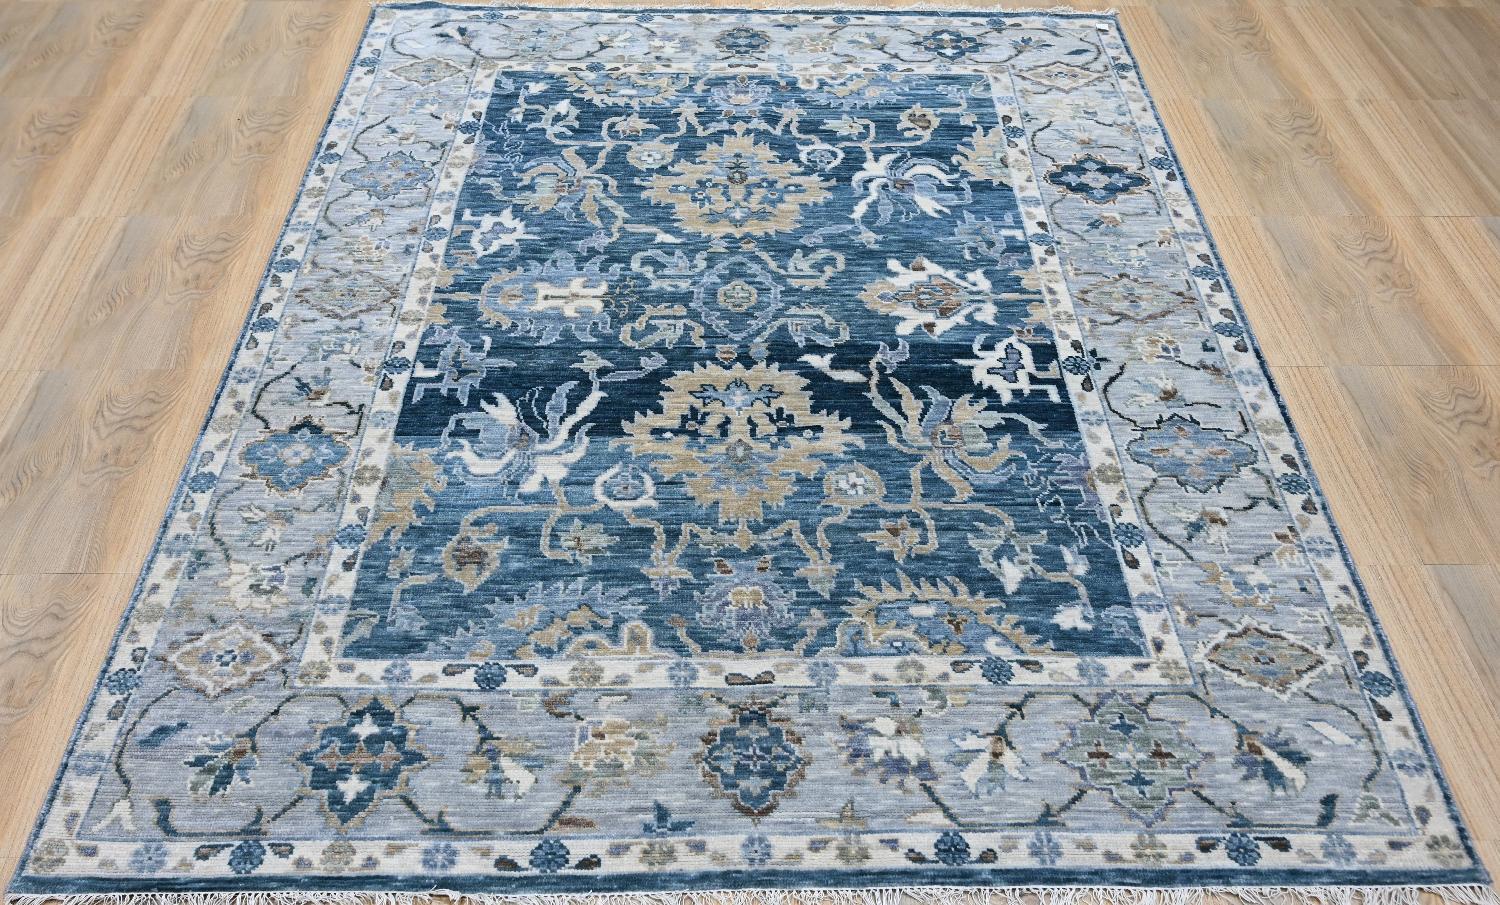 Introducing our model of exquisite new rug featuring a stunning Oushak design and delightful color palette. Entirely hand-knotted with precision, it boasts a luxurious blend of wool velvet on a cotton foundation. Elevate your space with this elegant